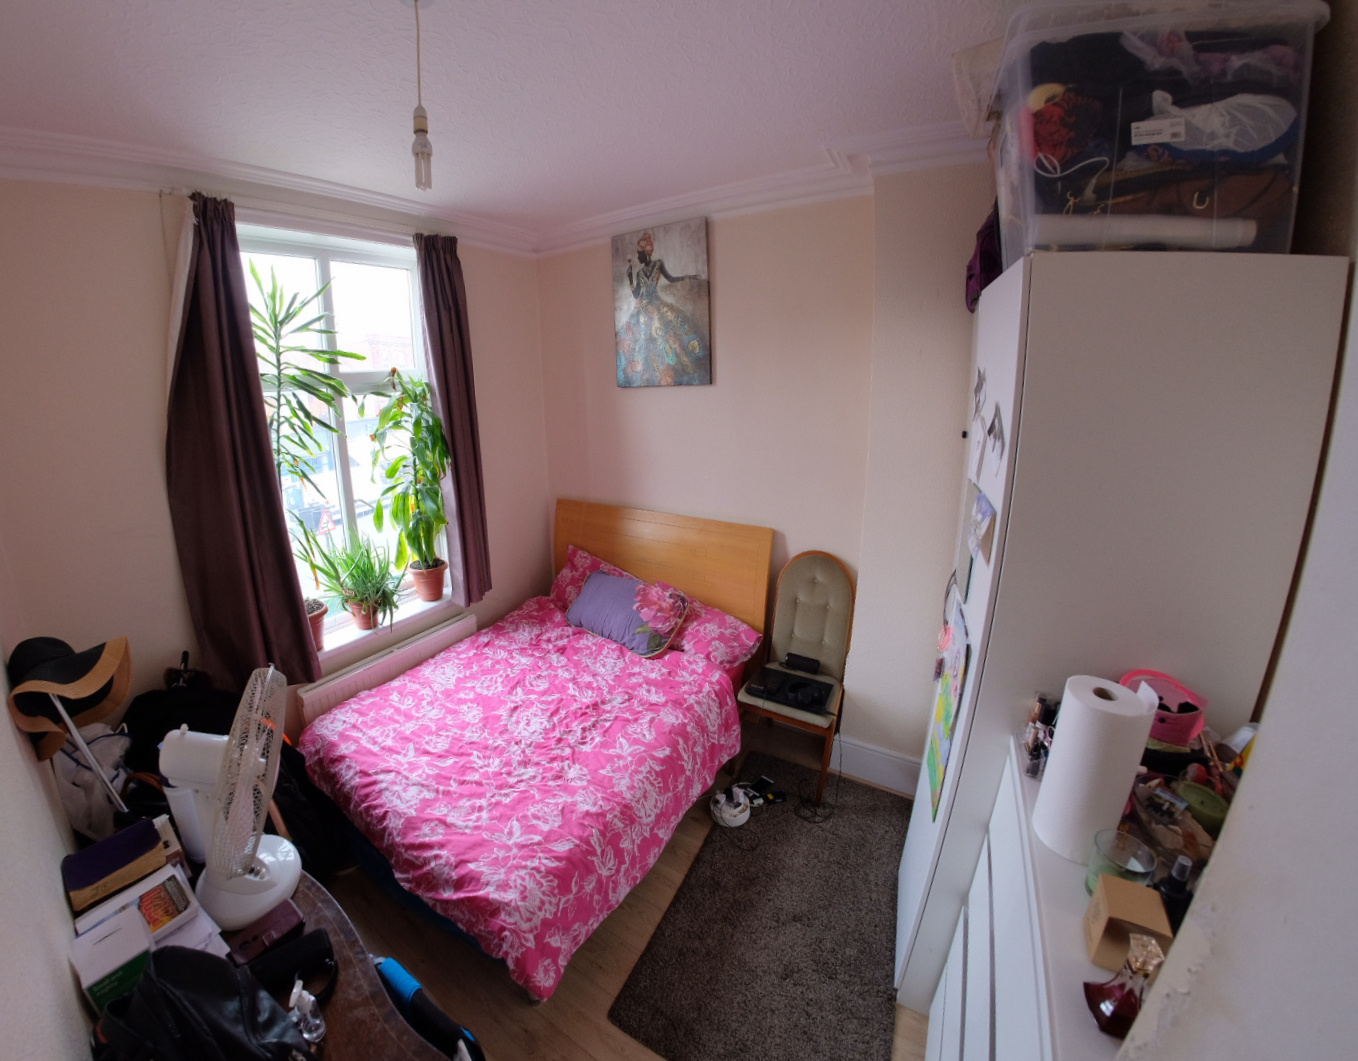 3 bed flat in Croydon East RoomsLocal image